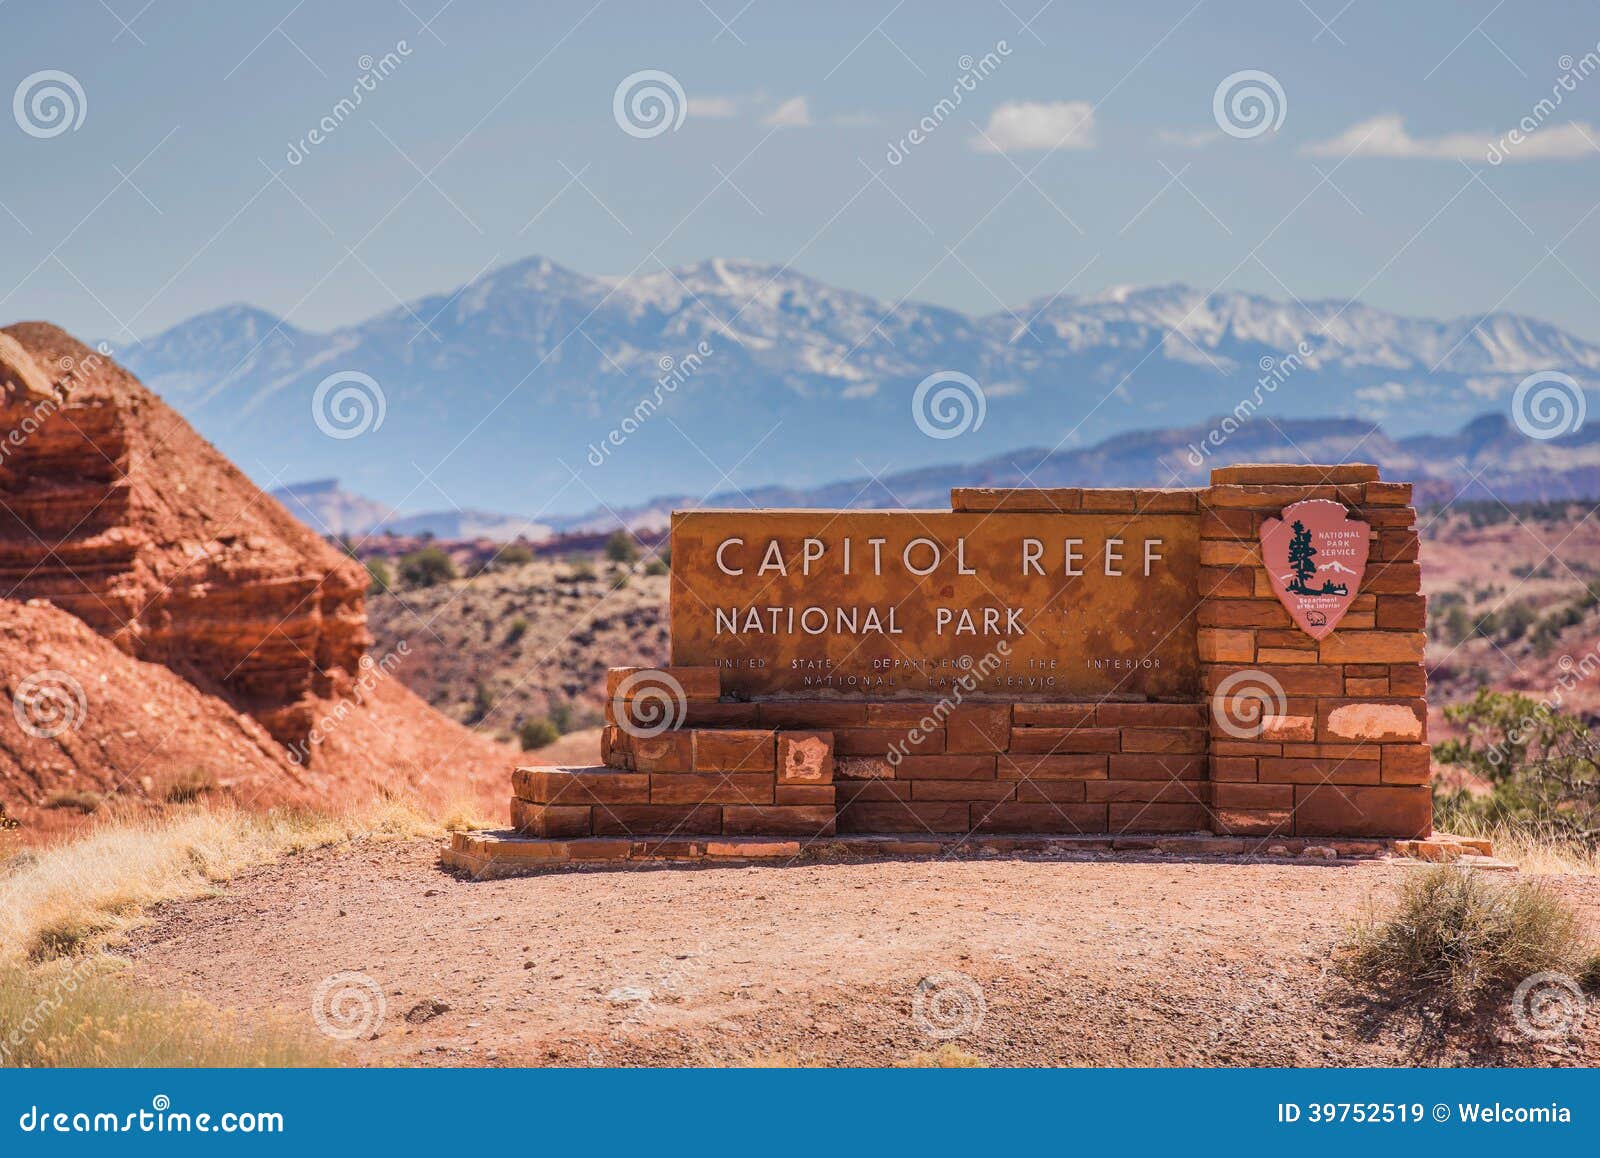 capitol reef entrance sign